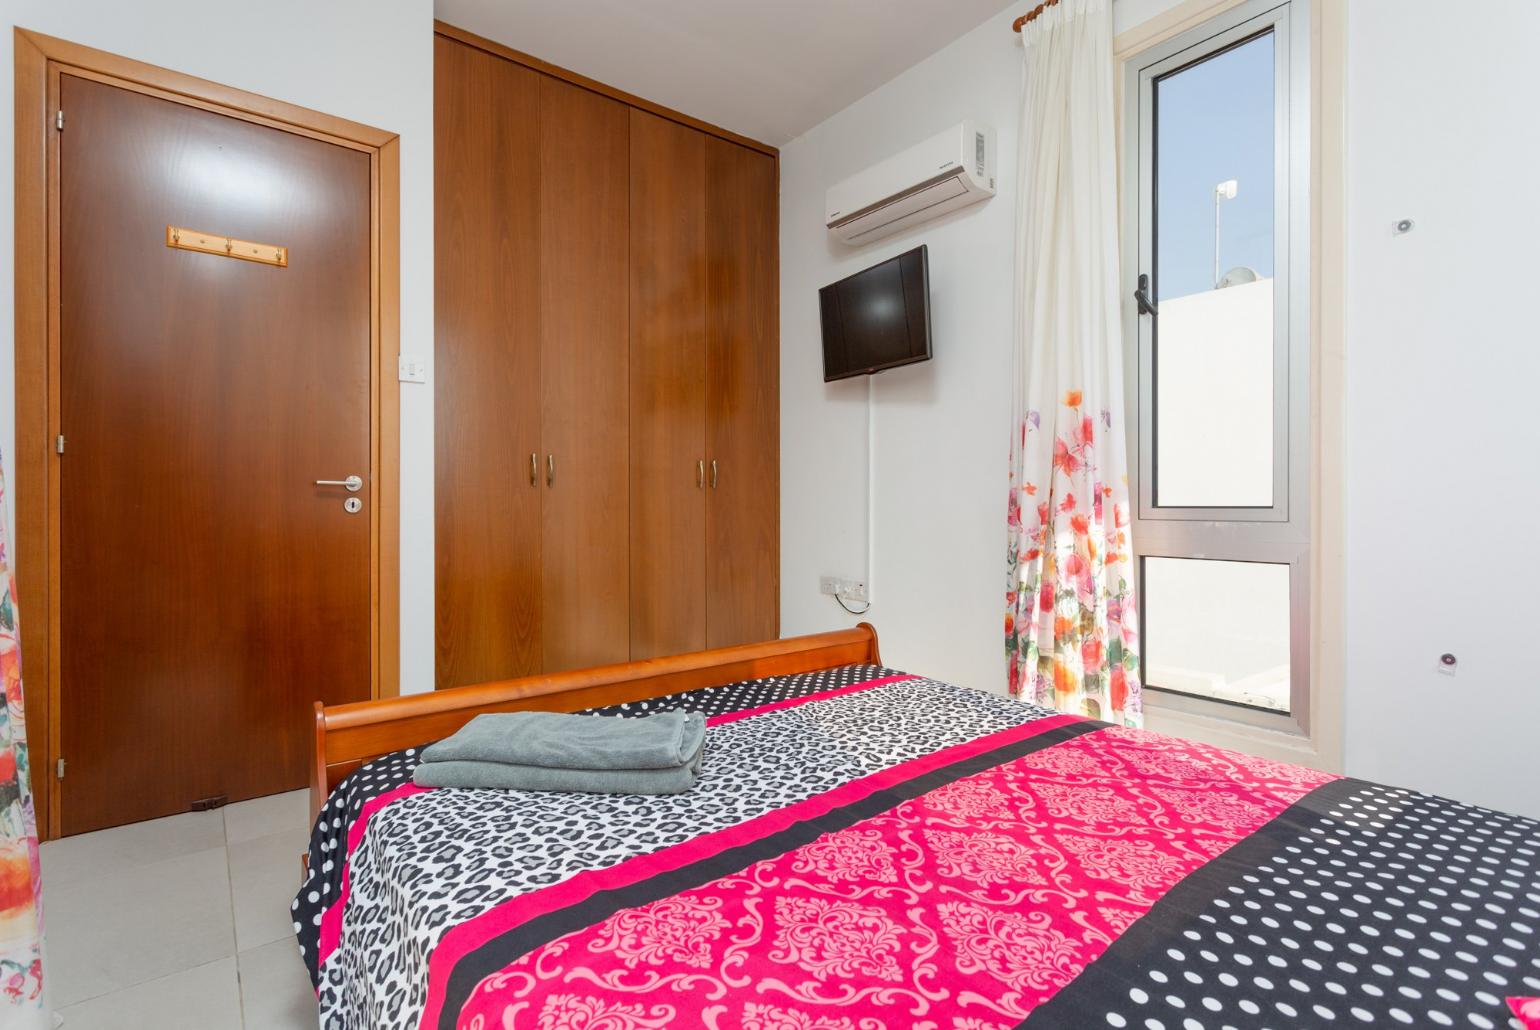 Double bedroom with A/C, satellite TV, and balcony access